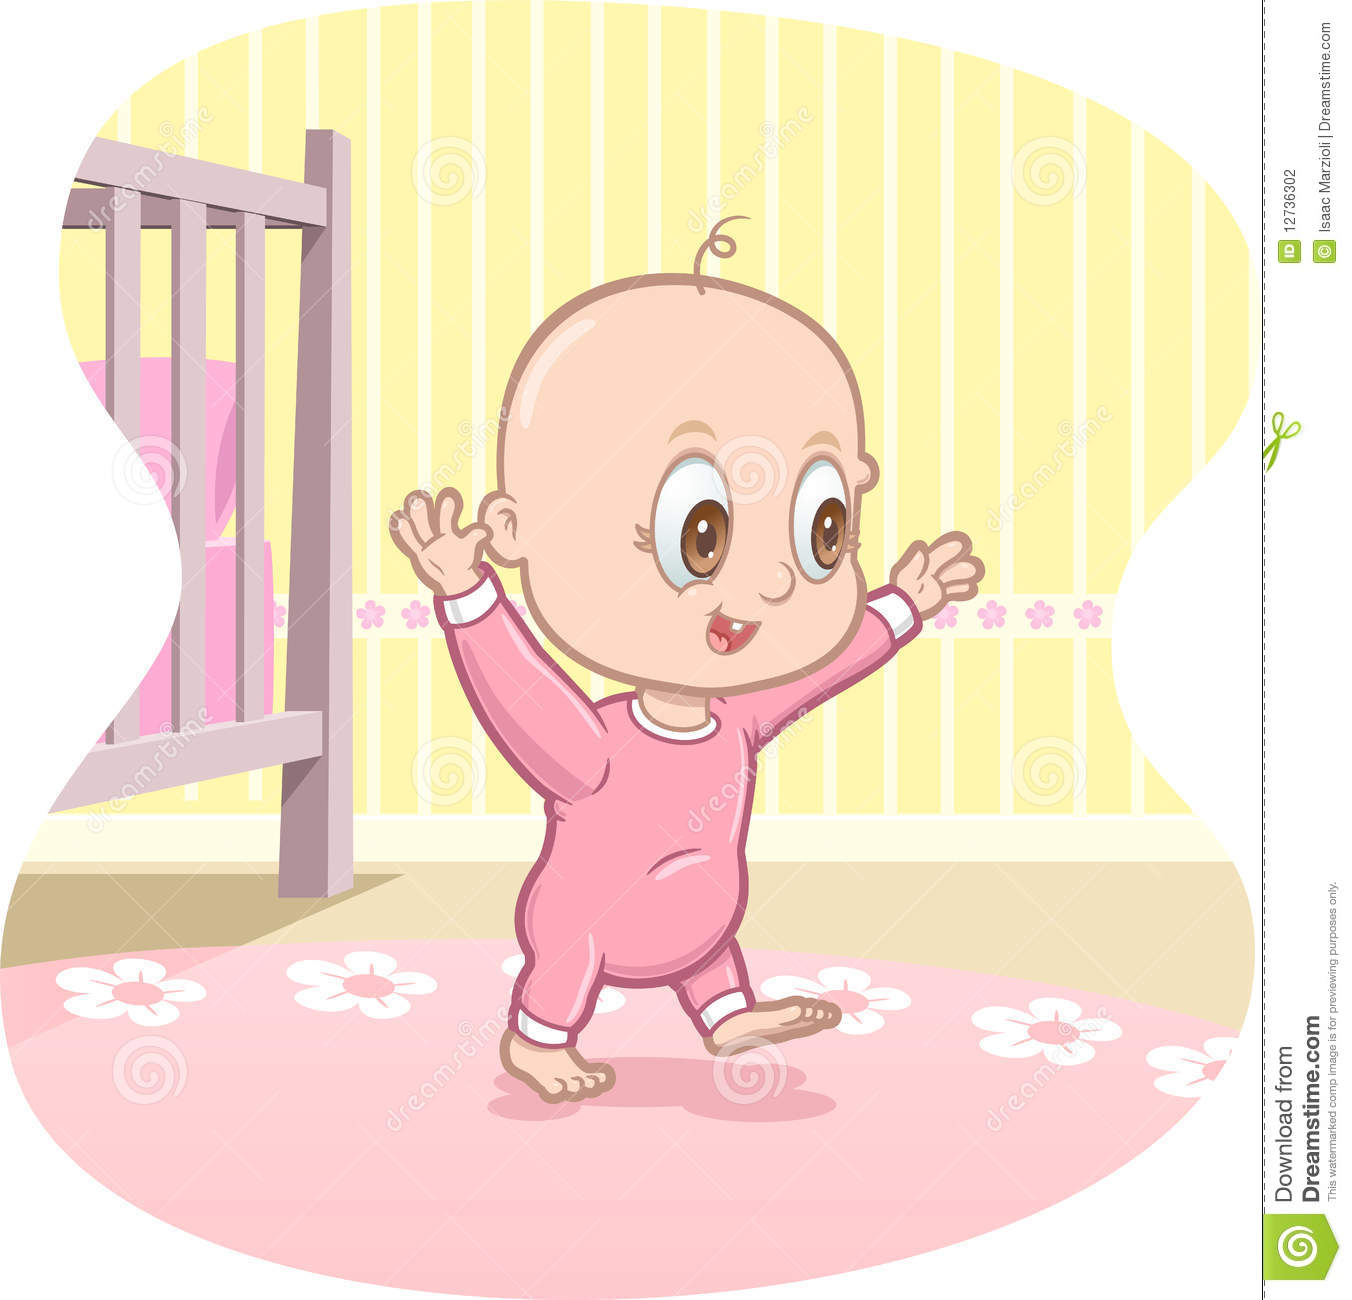 This Is A Vector Illustration Of A Baby Learning How To Walk